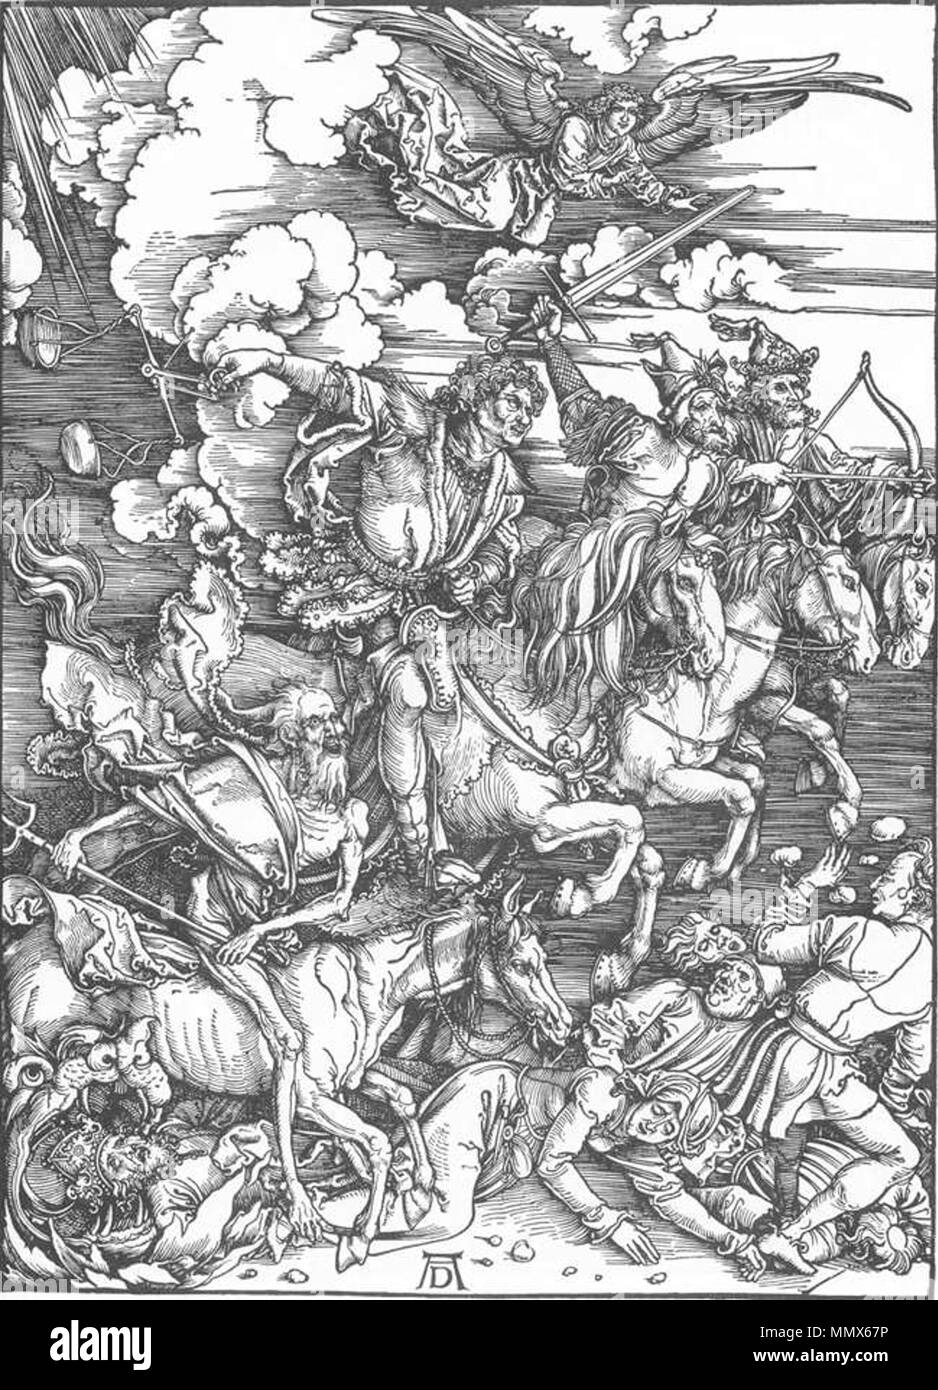 English: The Revelation of St John: 4. The Four Riders of the Apocalypse . between 1497 and 1498. Durer, apocalisse, 04 i quattro cavalieri dell'apocalisse Stock Photo